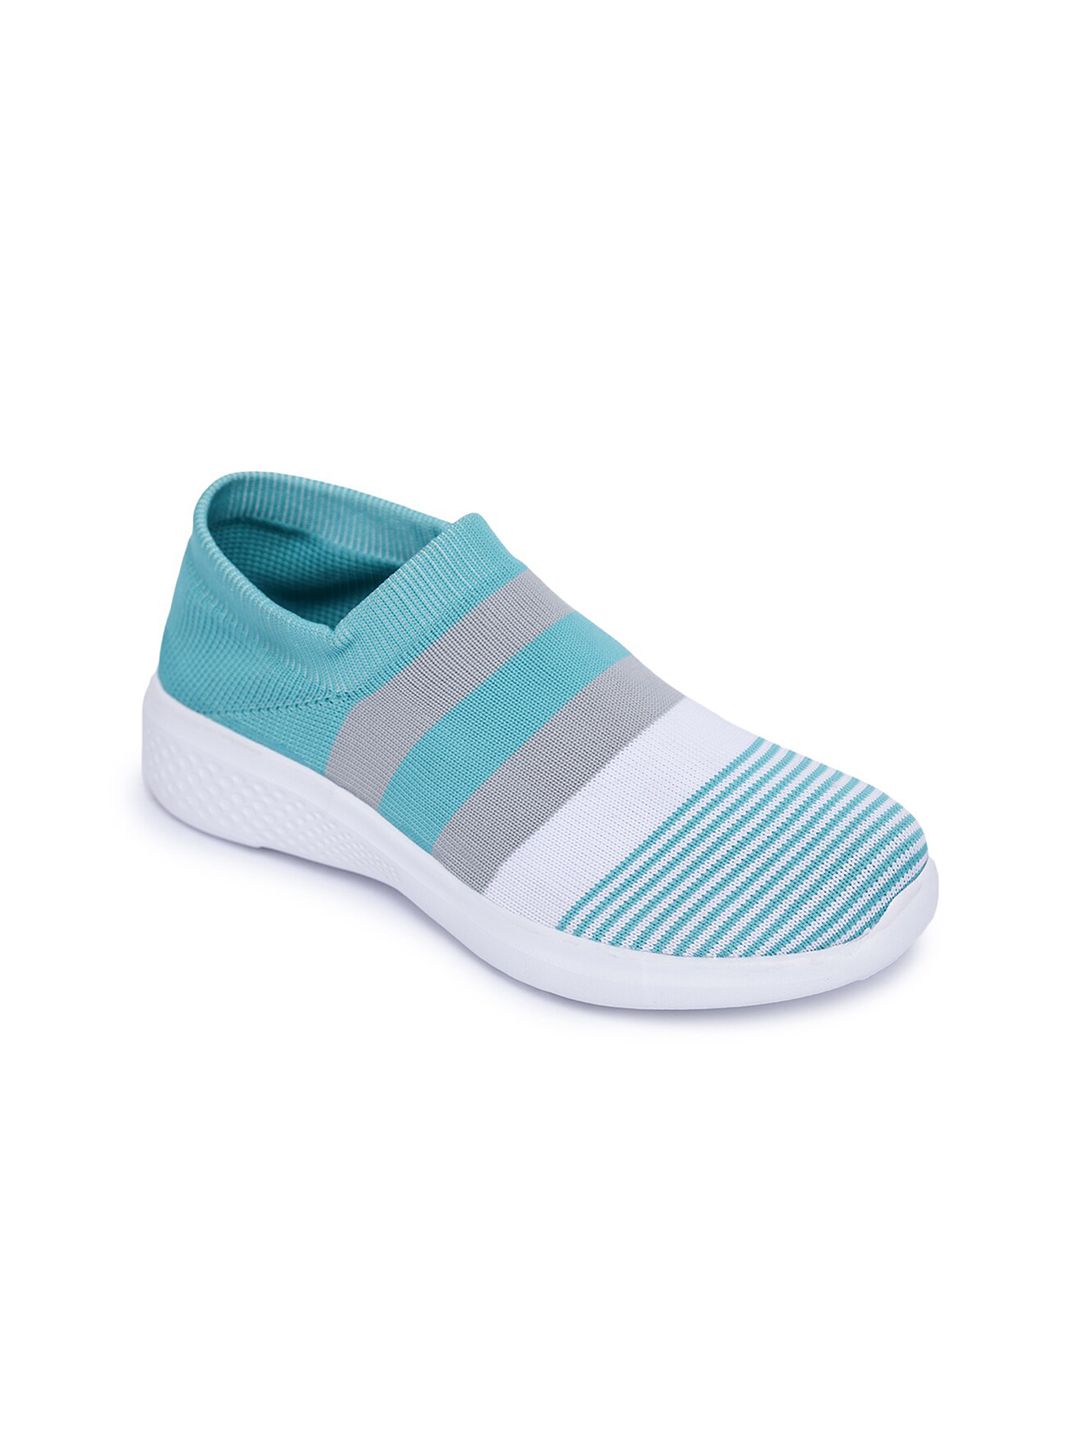 TRASE Women Sea Green Textile Running Shoes Price in India